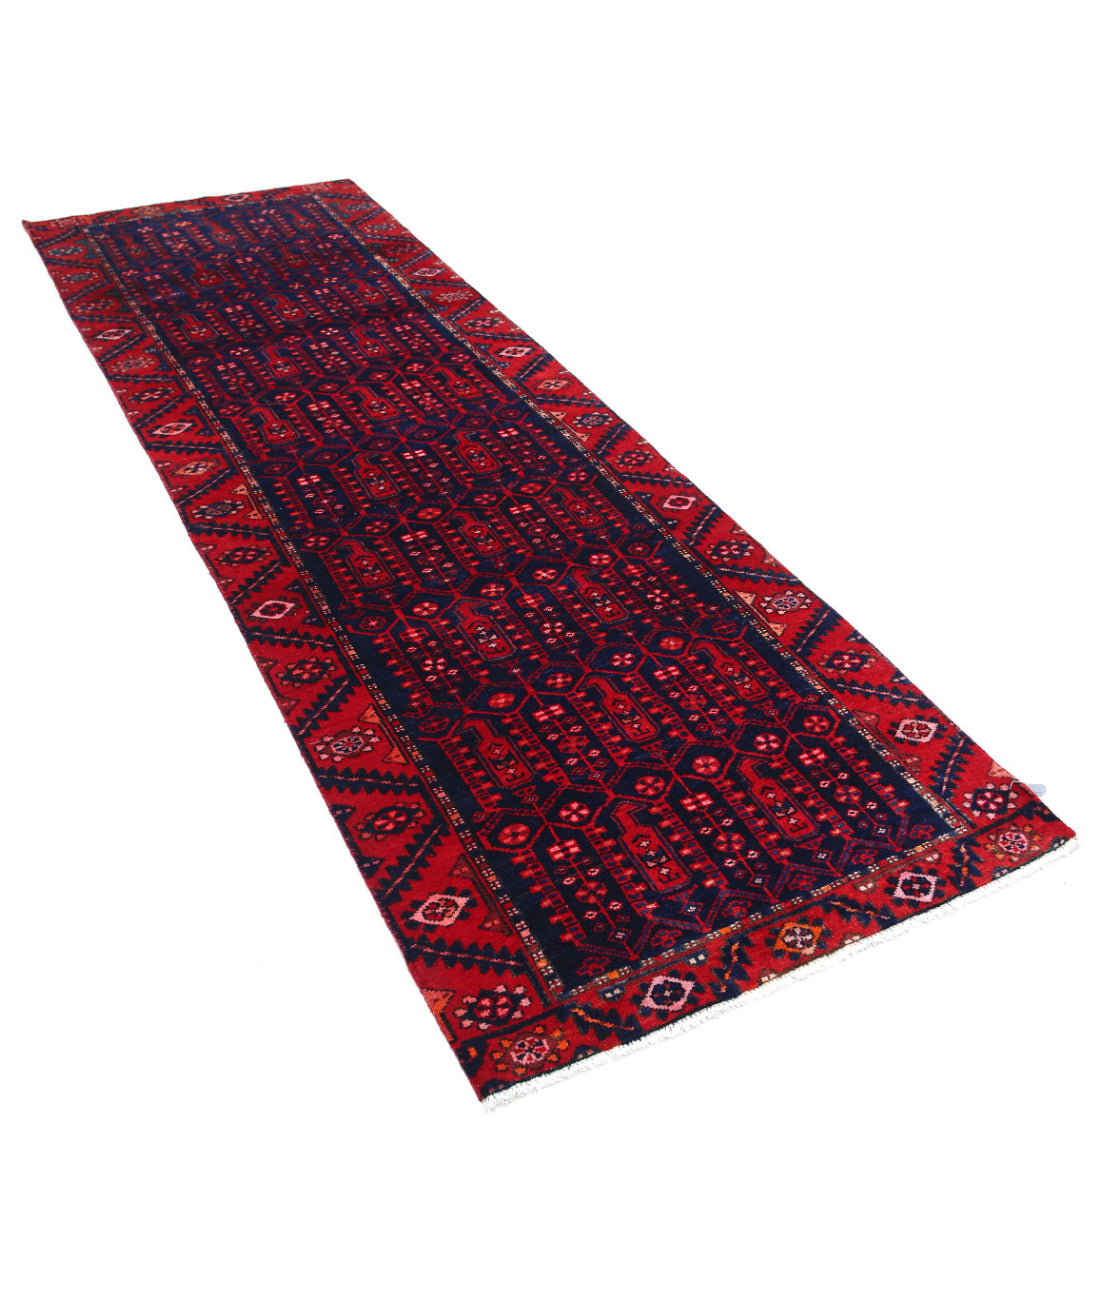 Hand Knotted Persian Hamadan Wool Rug - 3'4'' x 10'0'' 3'4'' x 10'0'' (100 X 300) / Blue / Red